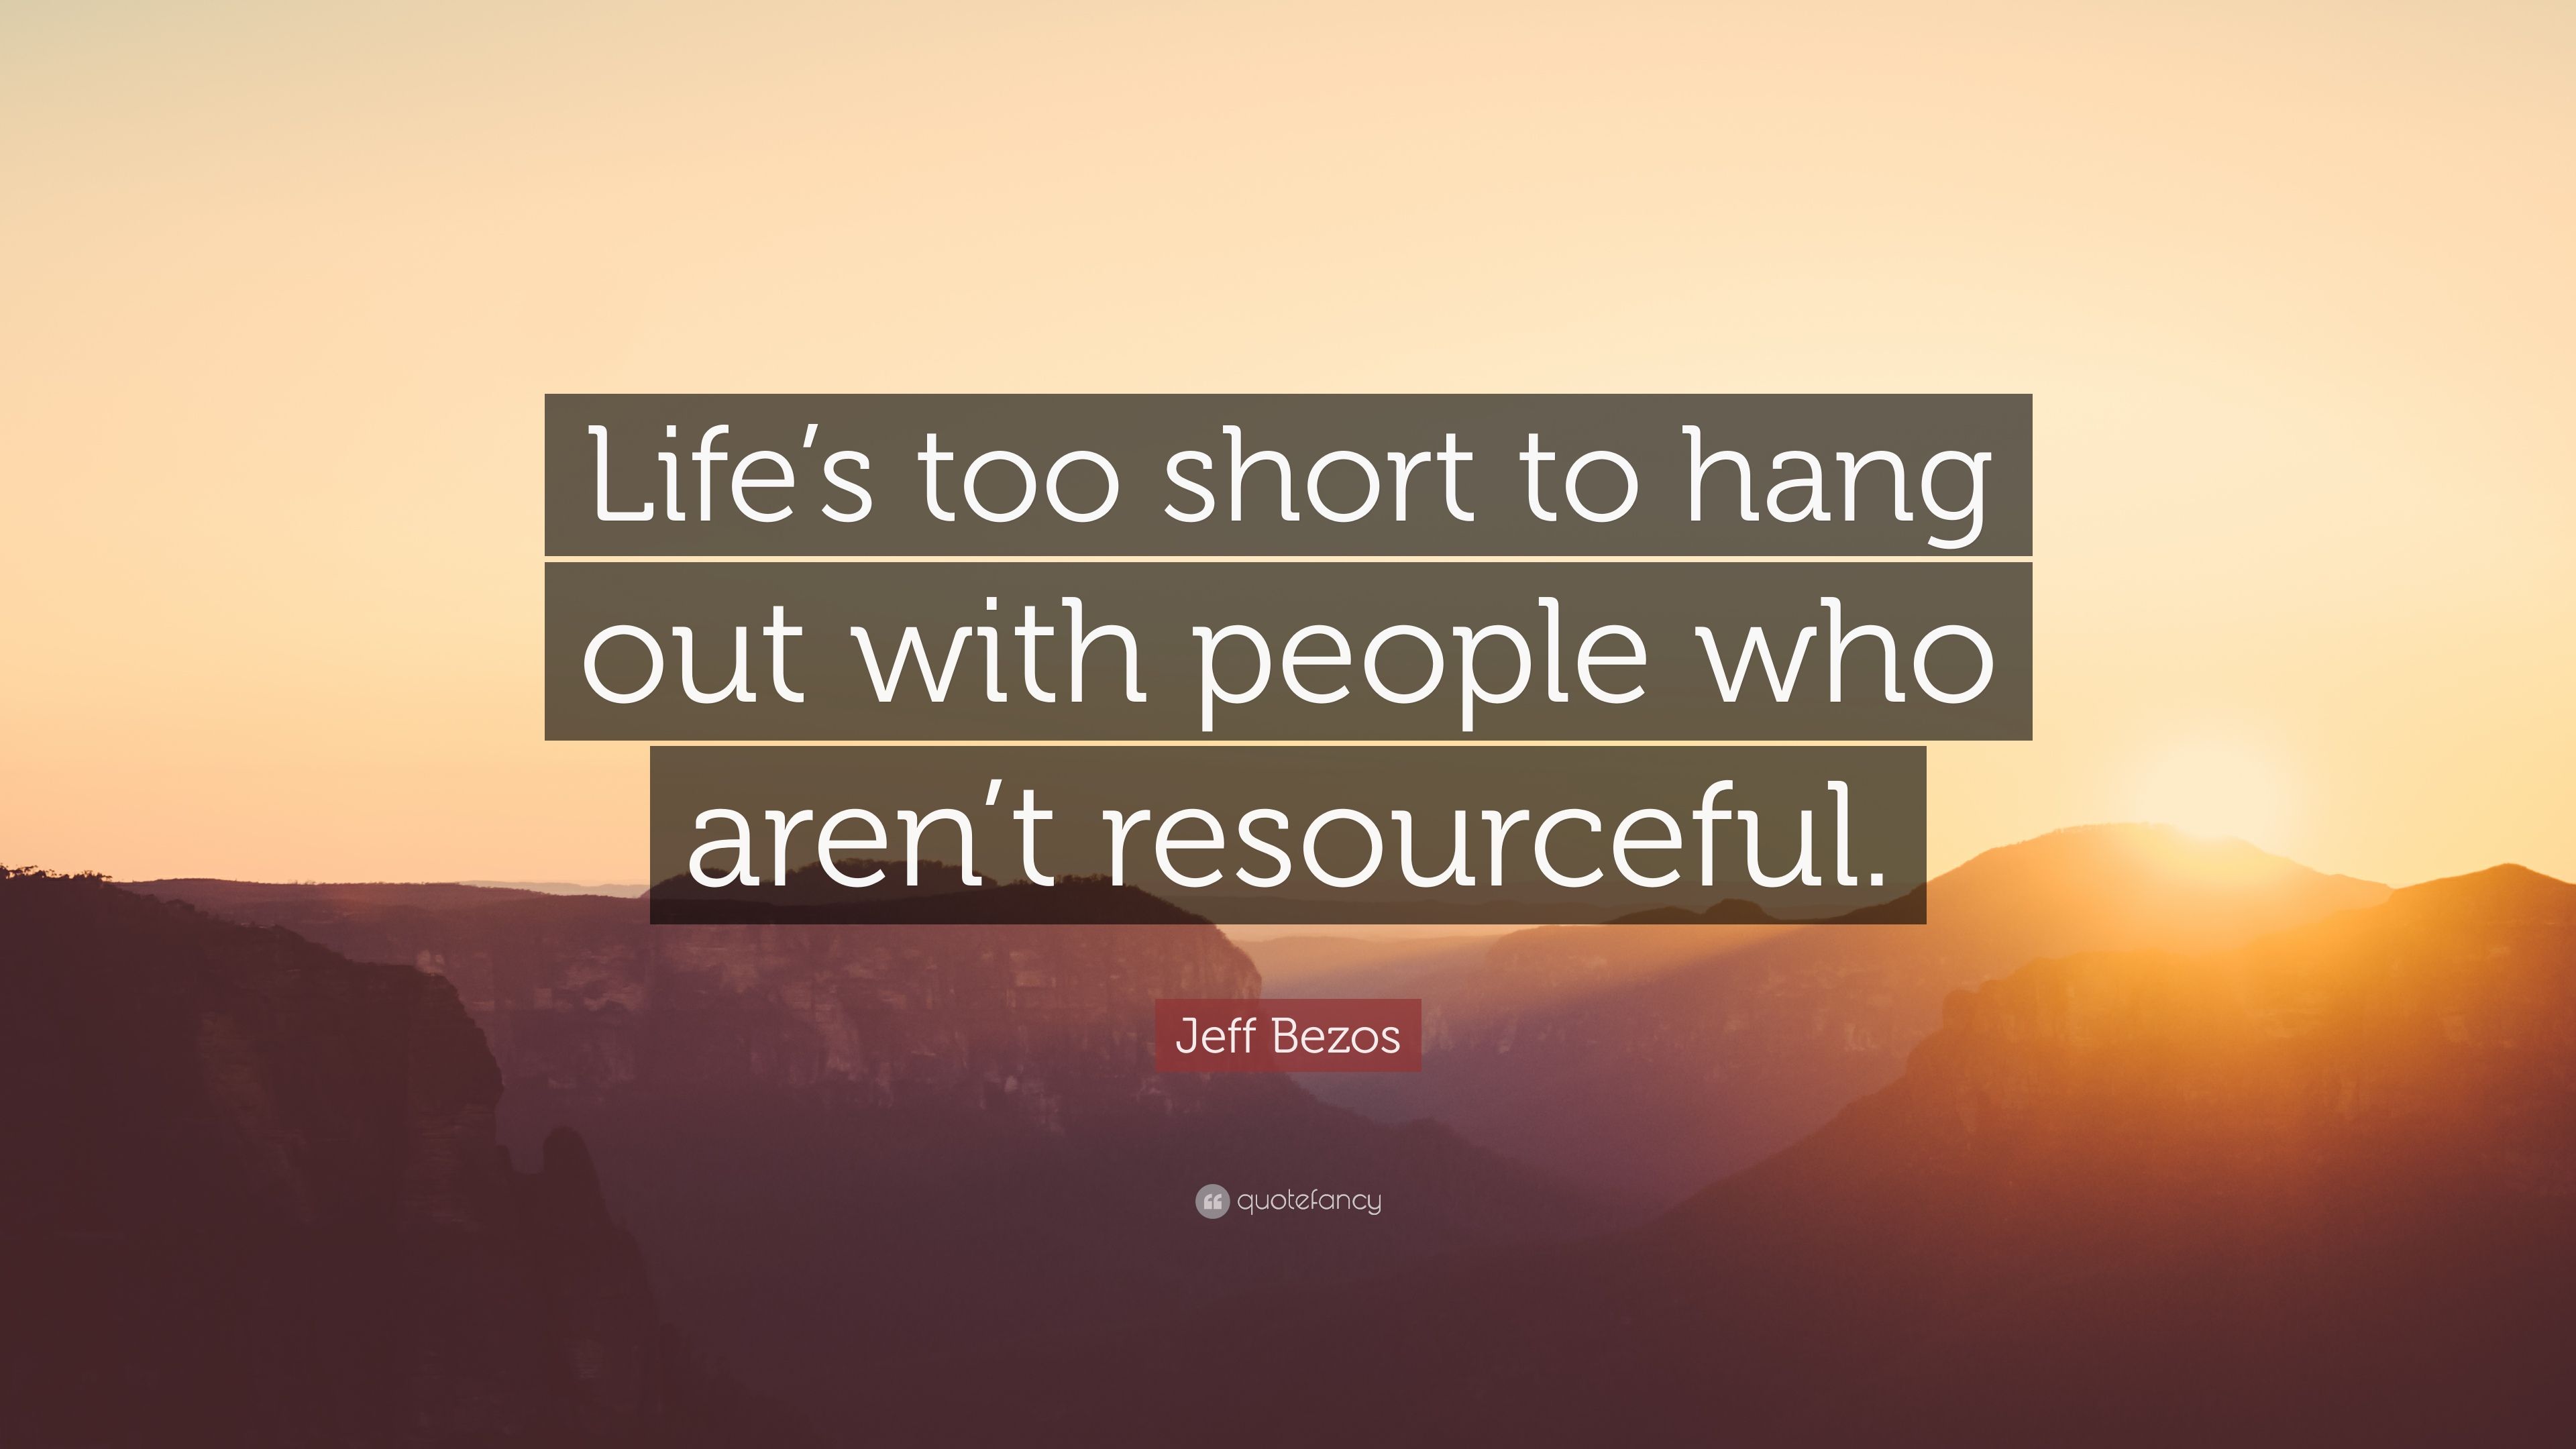 Jeff Bezos Quote: “Life's too short to hang out with people who aren't resourceful.” (18 wallpaper)